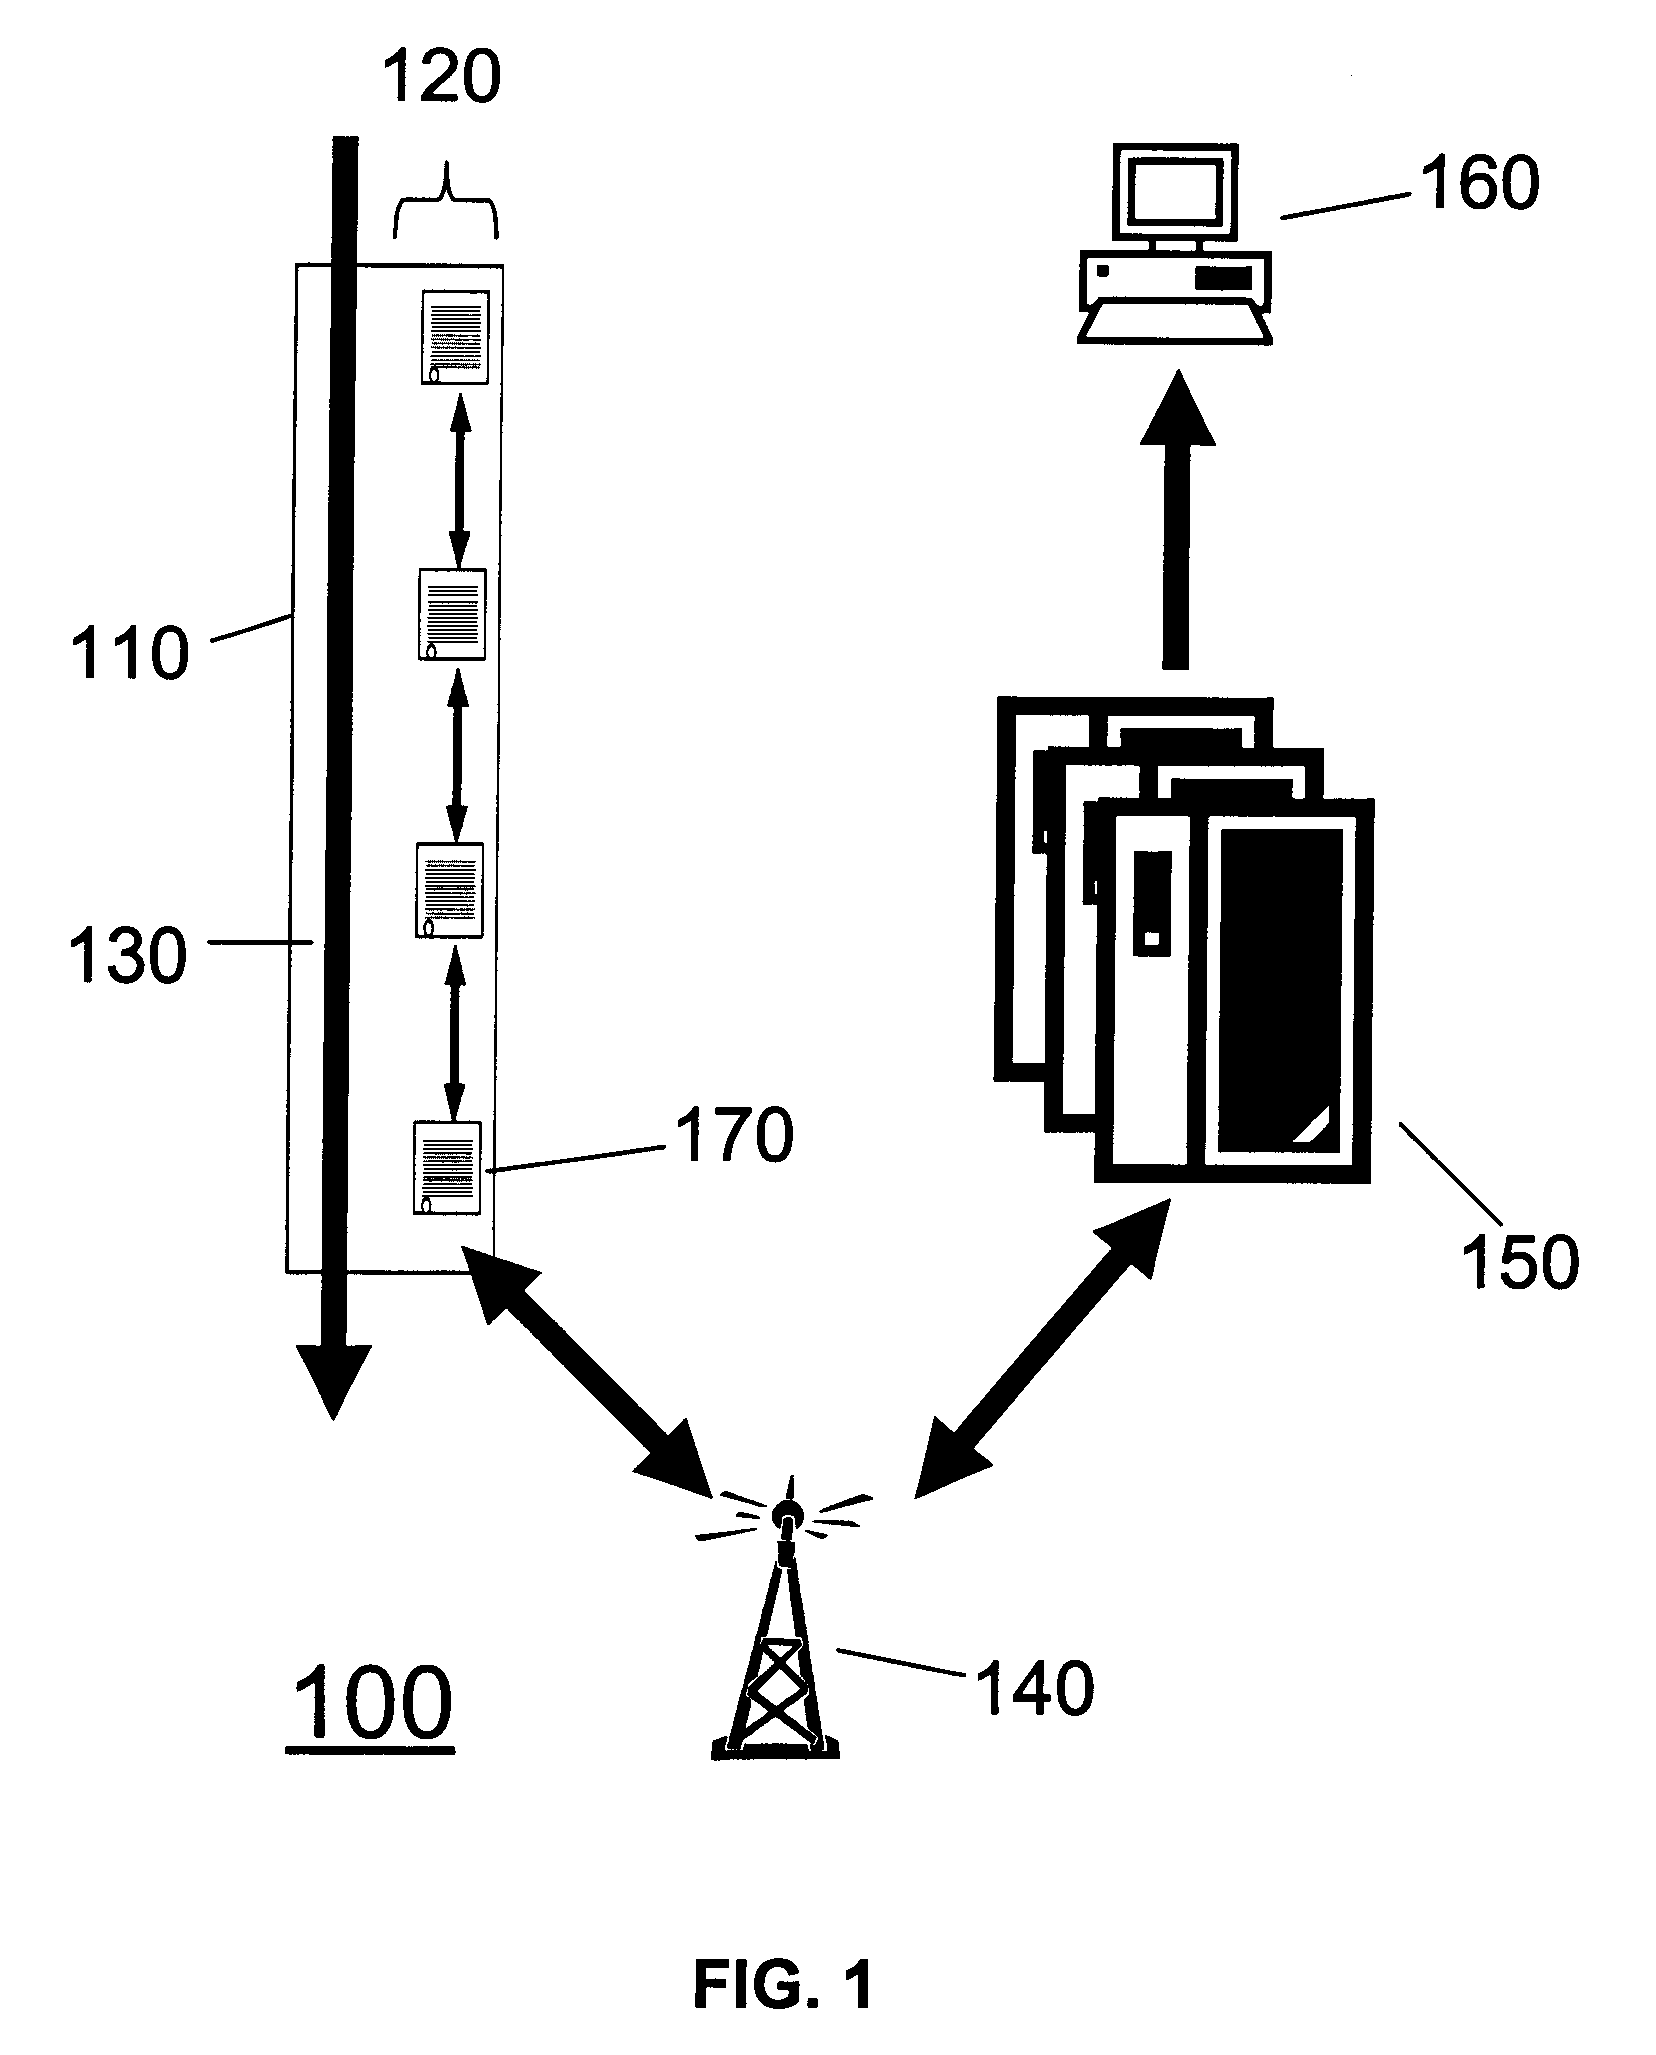 System and methods for predicting failures in a fluid delivery system